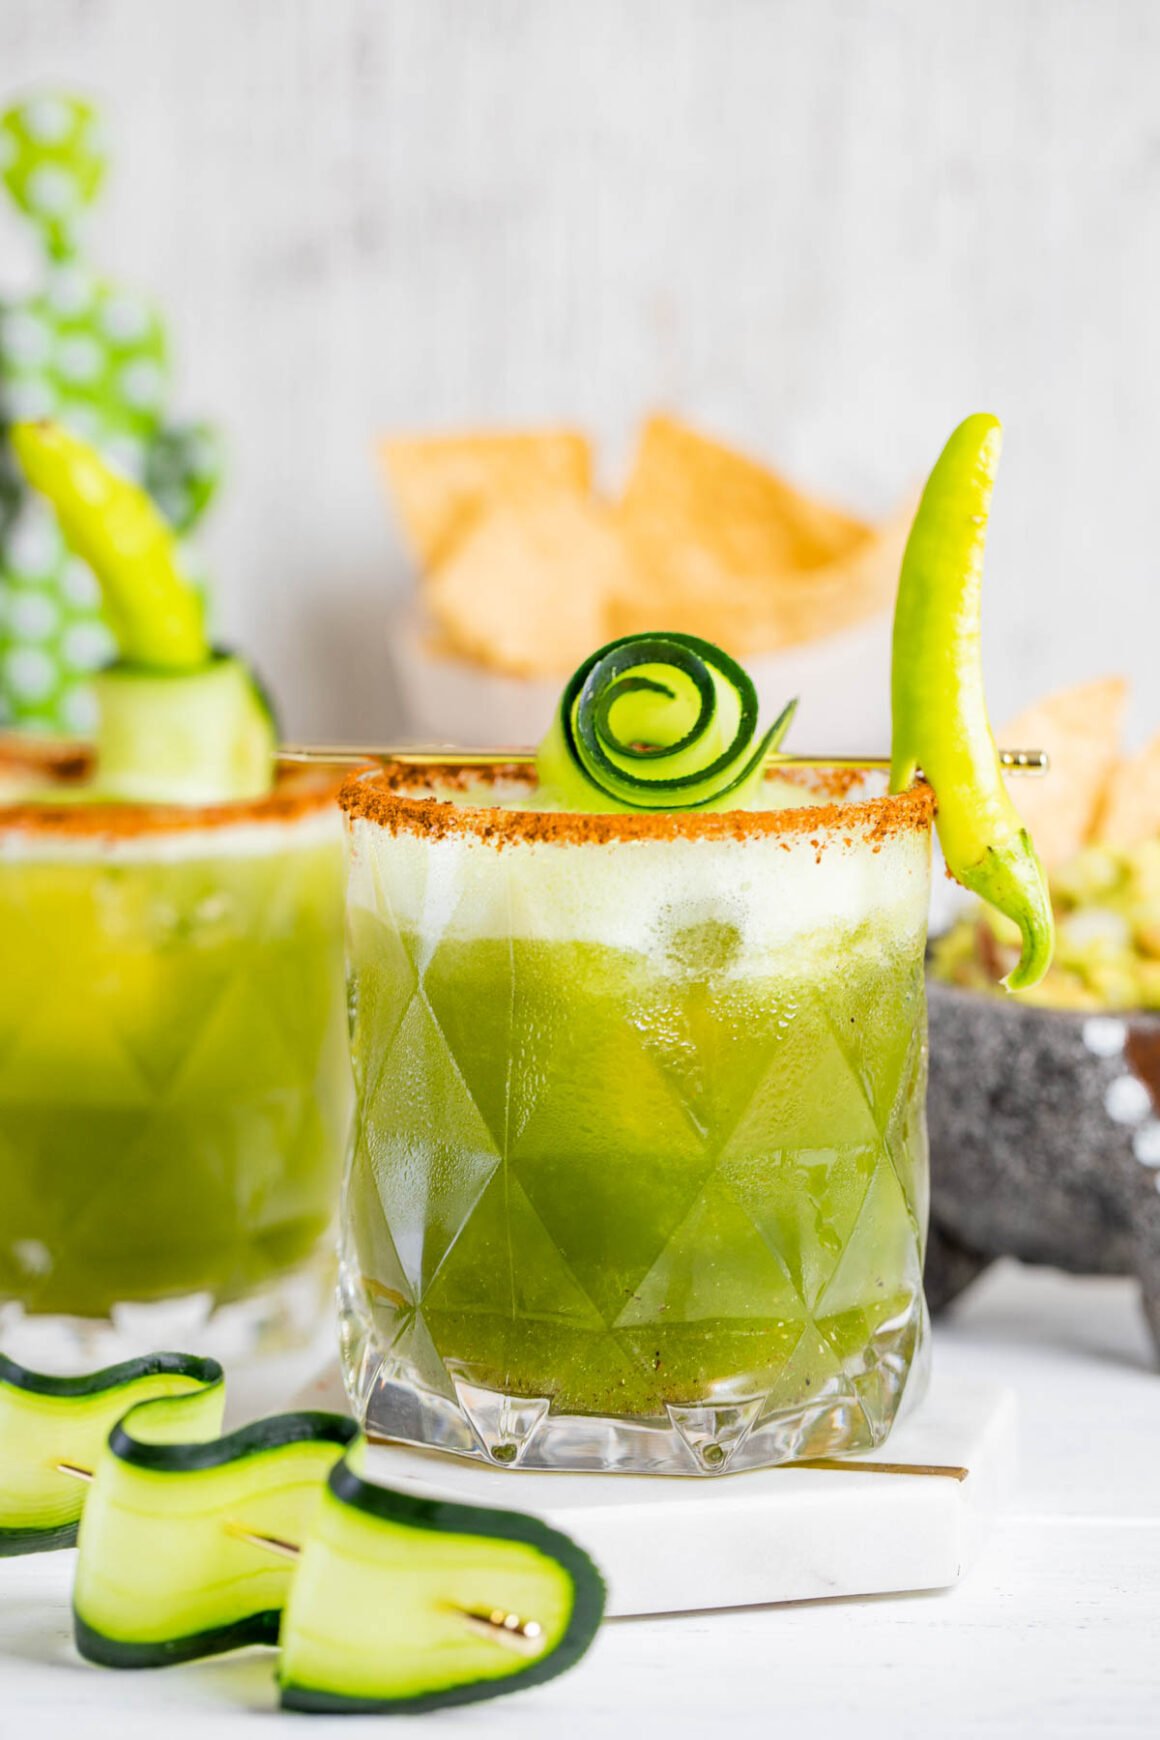 This Aguachile Margarita recipe will blow your mind, it is not only for those who love spiciness, it’s incredible flavor accompanied by a delicious dish will take you to another level!

